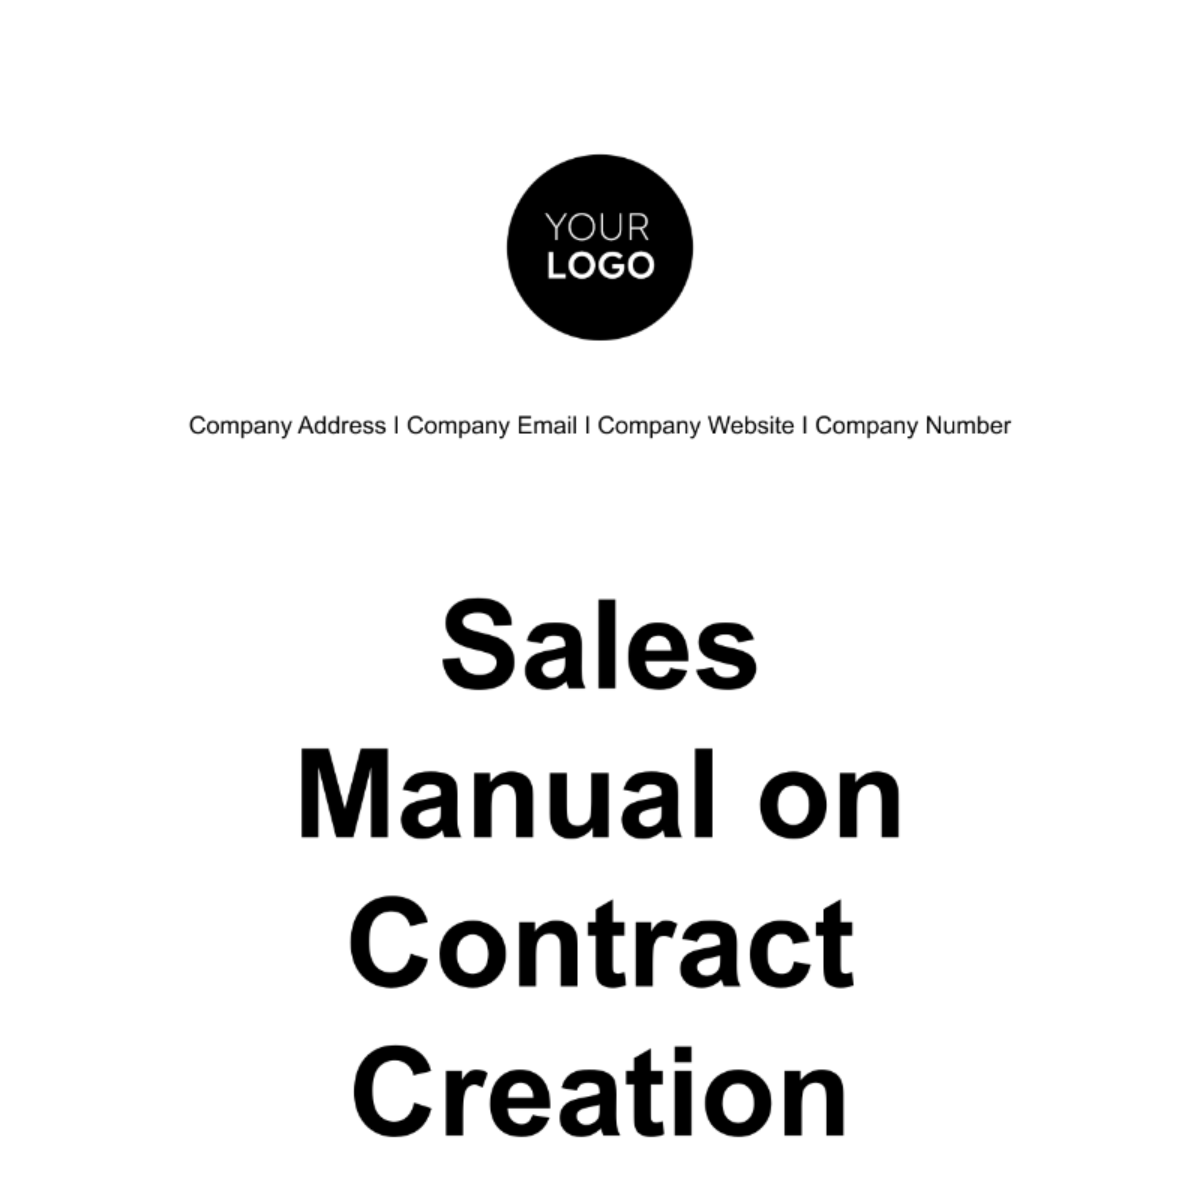 Free Sales Manual on Contract Creation Template